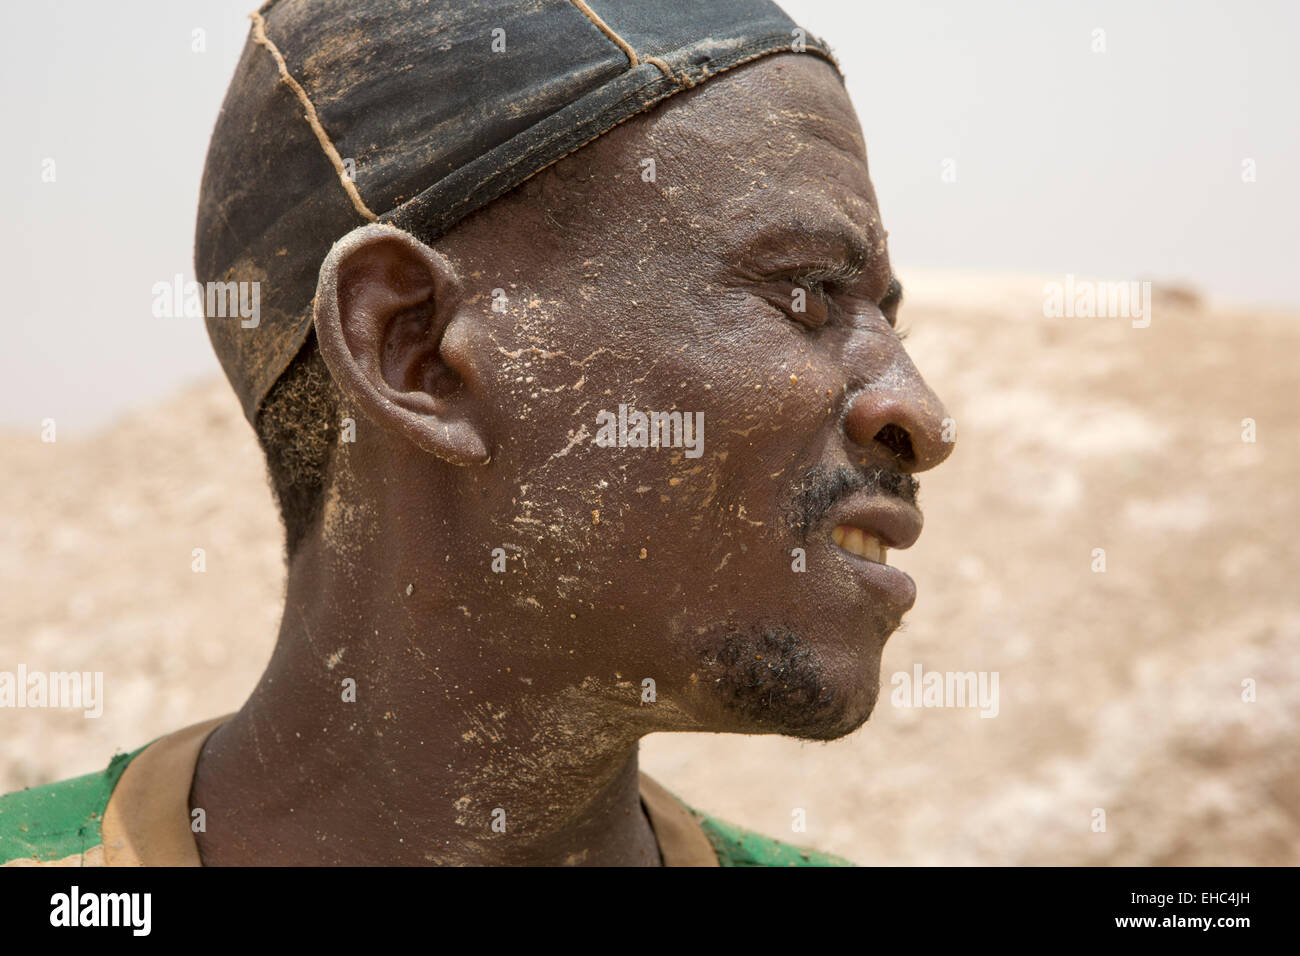 KOMOBANGAU, NIGER, : A miner wearing his head torch beside the vertical entrance shaft of their crude gold mine. Stock Photo